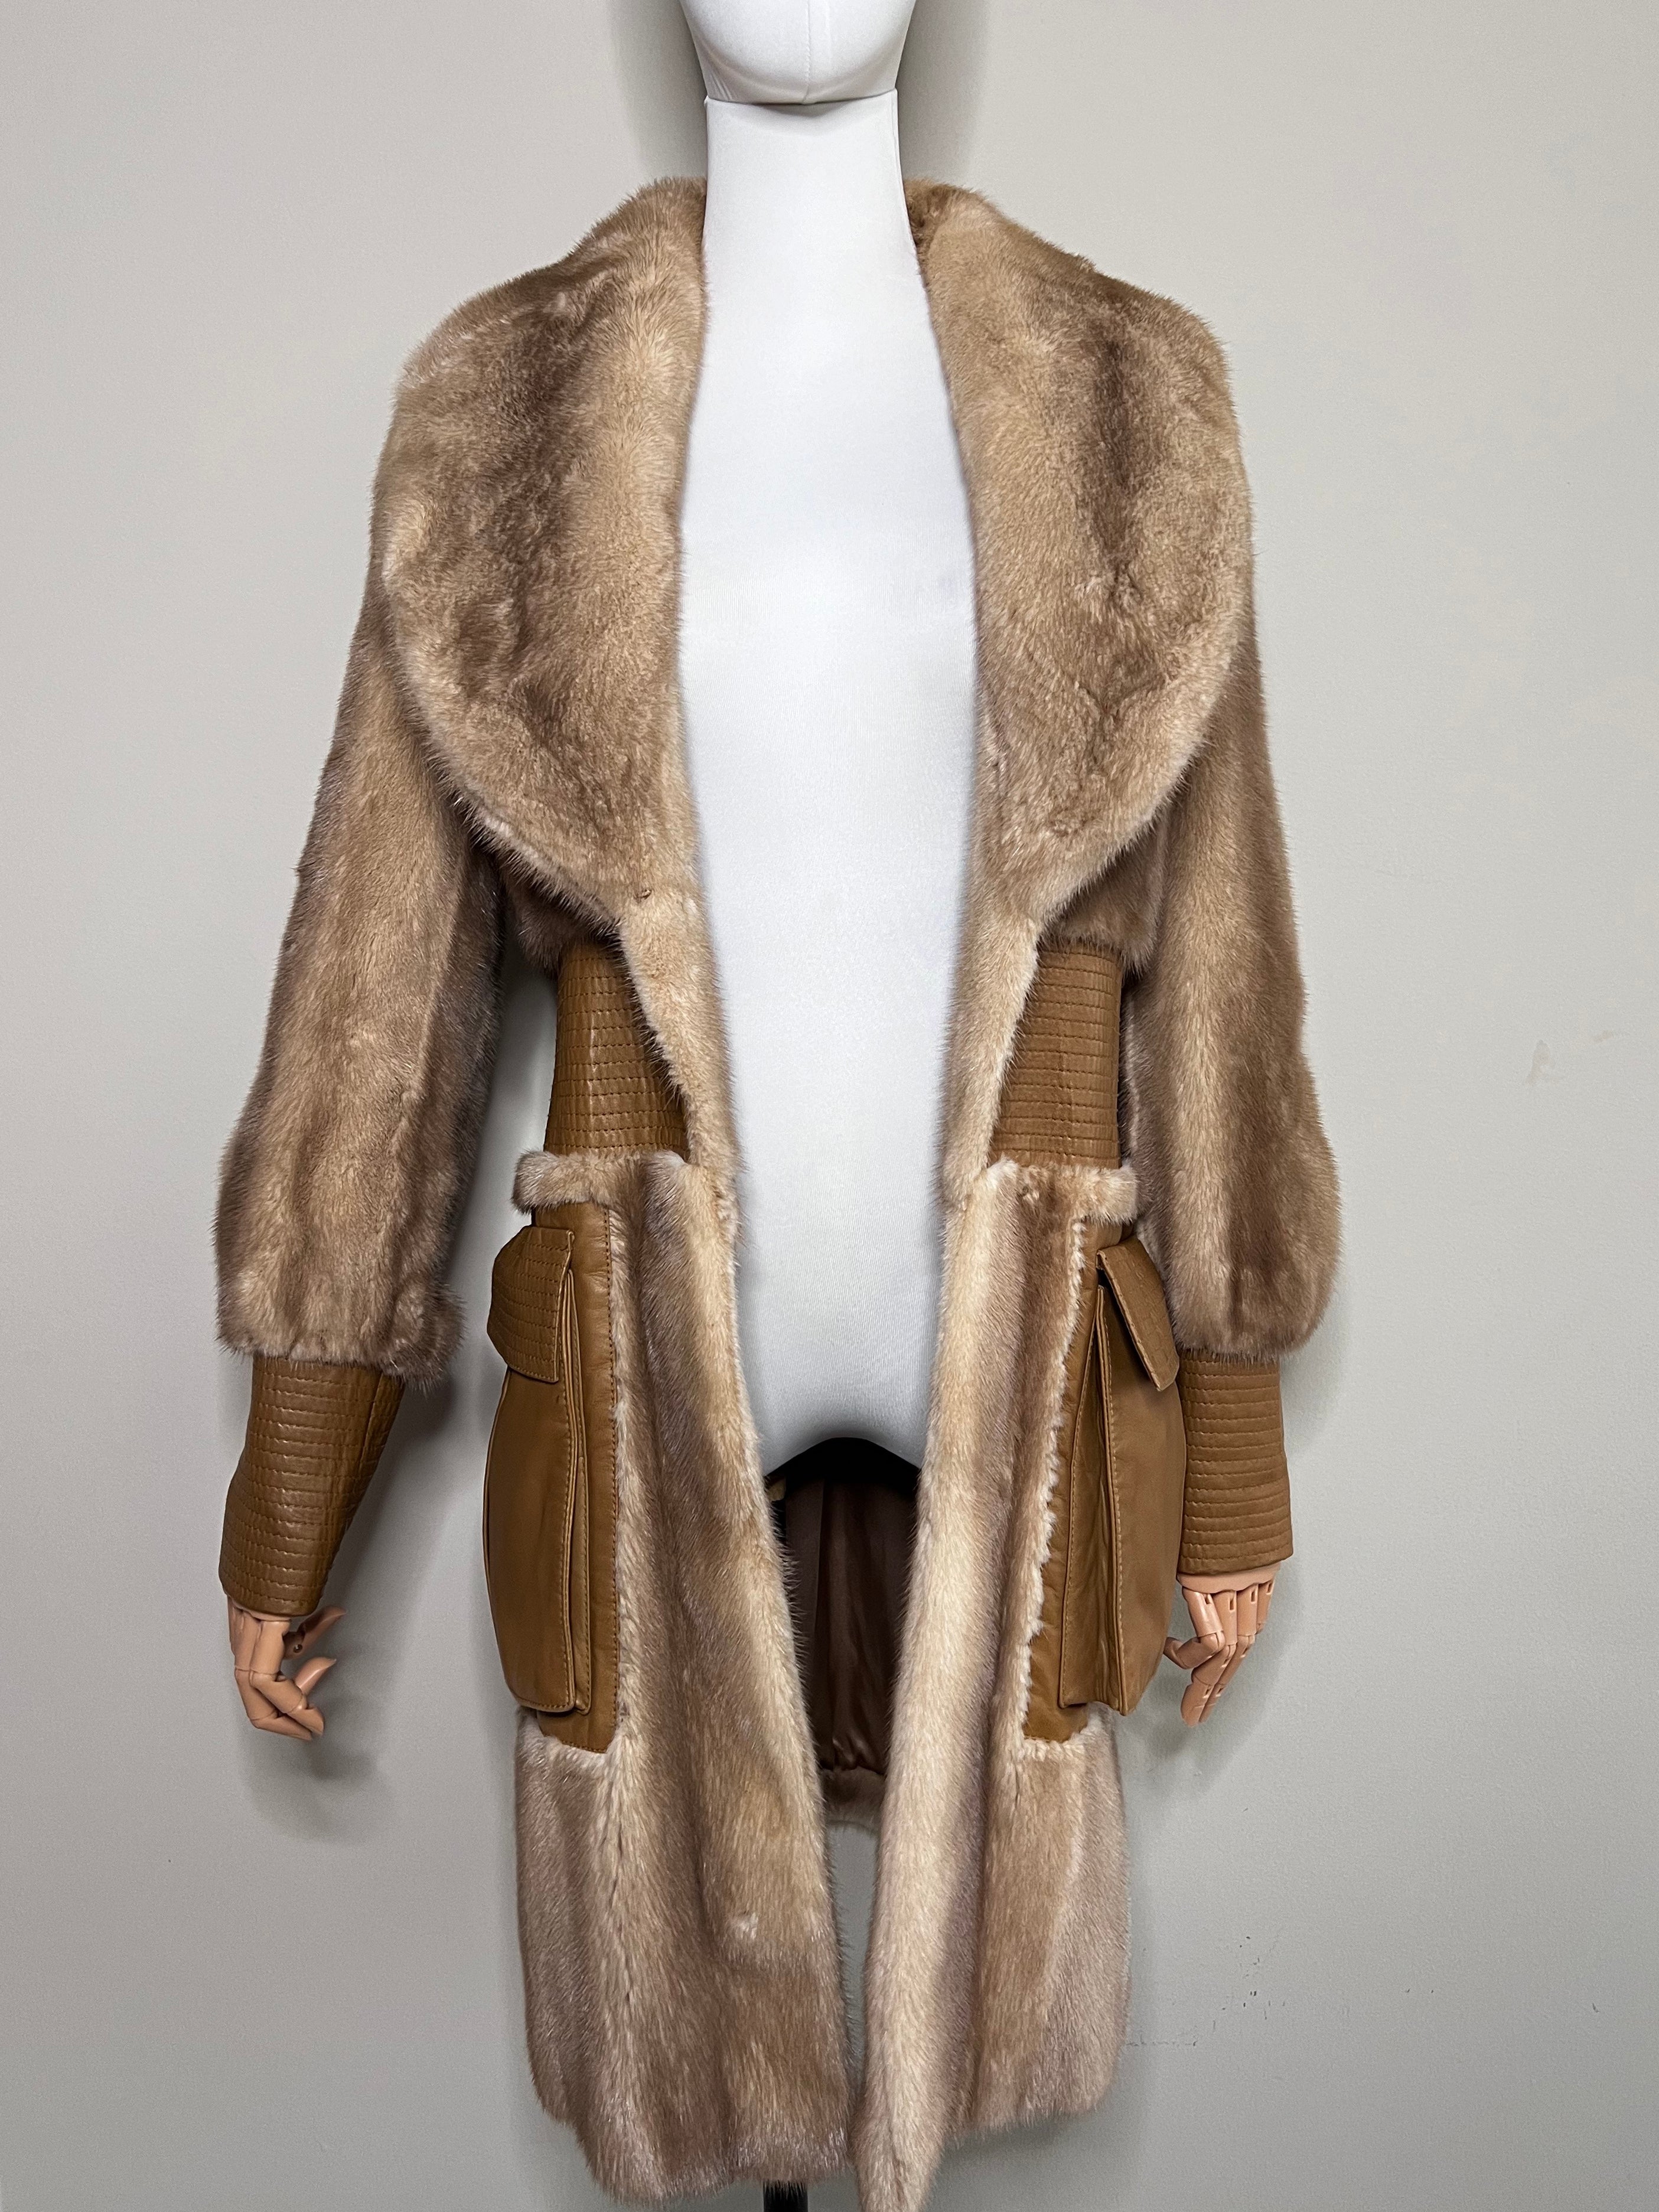 Brown Mink Coat With Nappa Leather Pockets Cuffs Waist Insert belted Jacket - CHRISTIAN DIOR